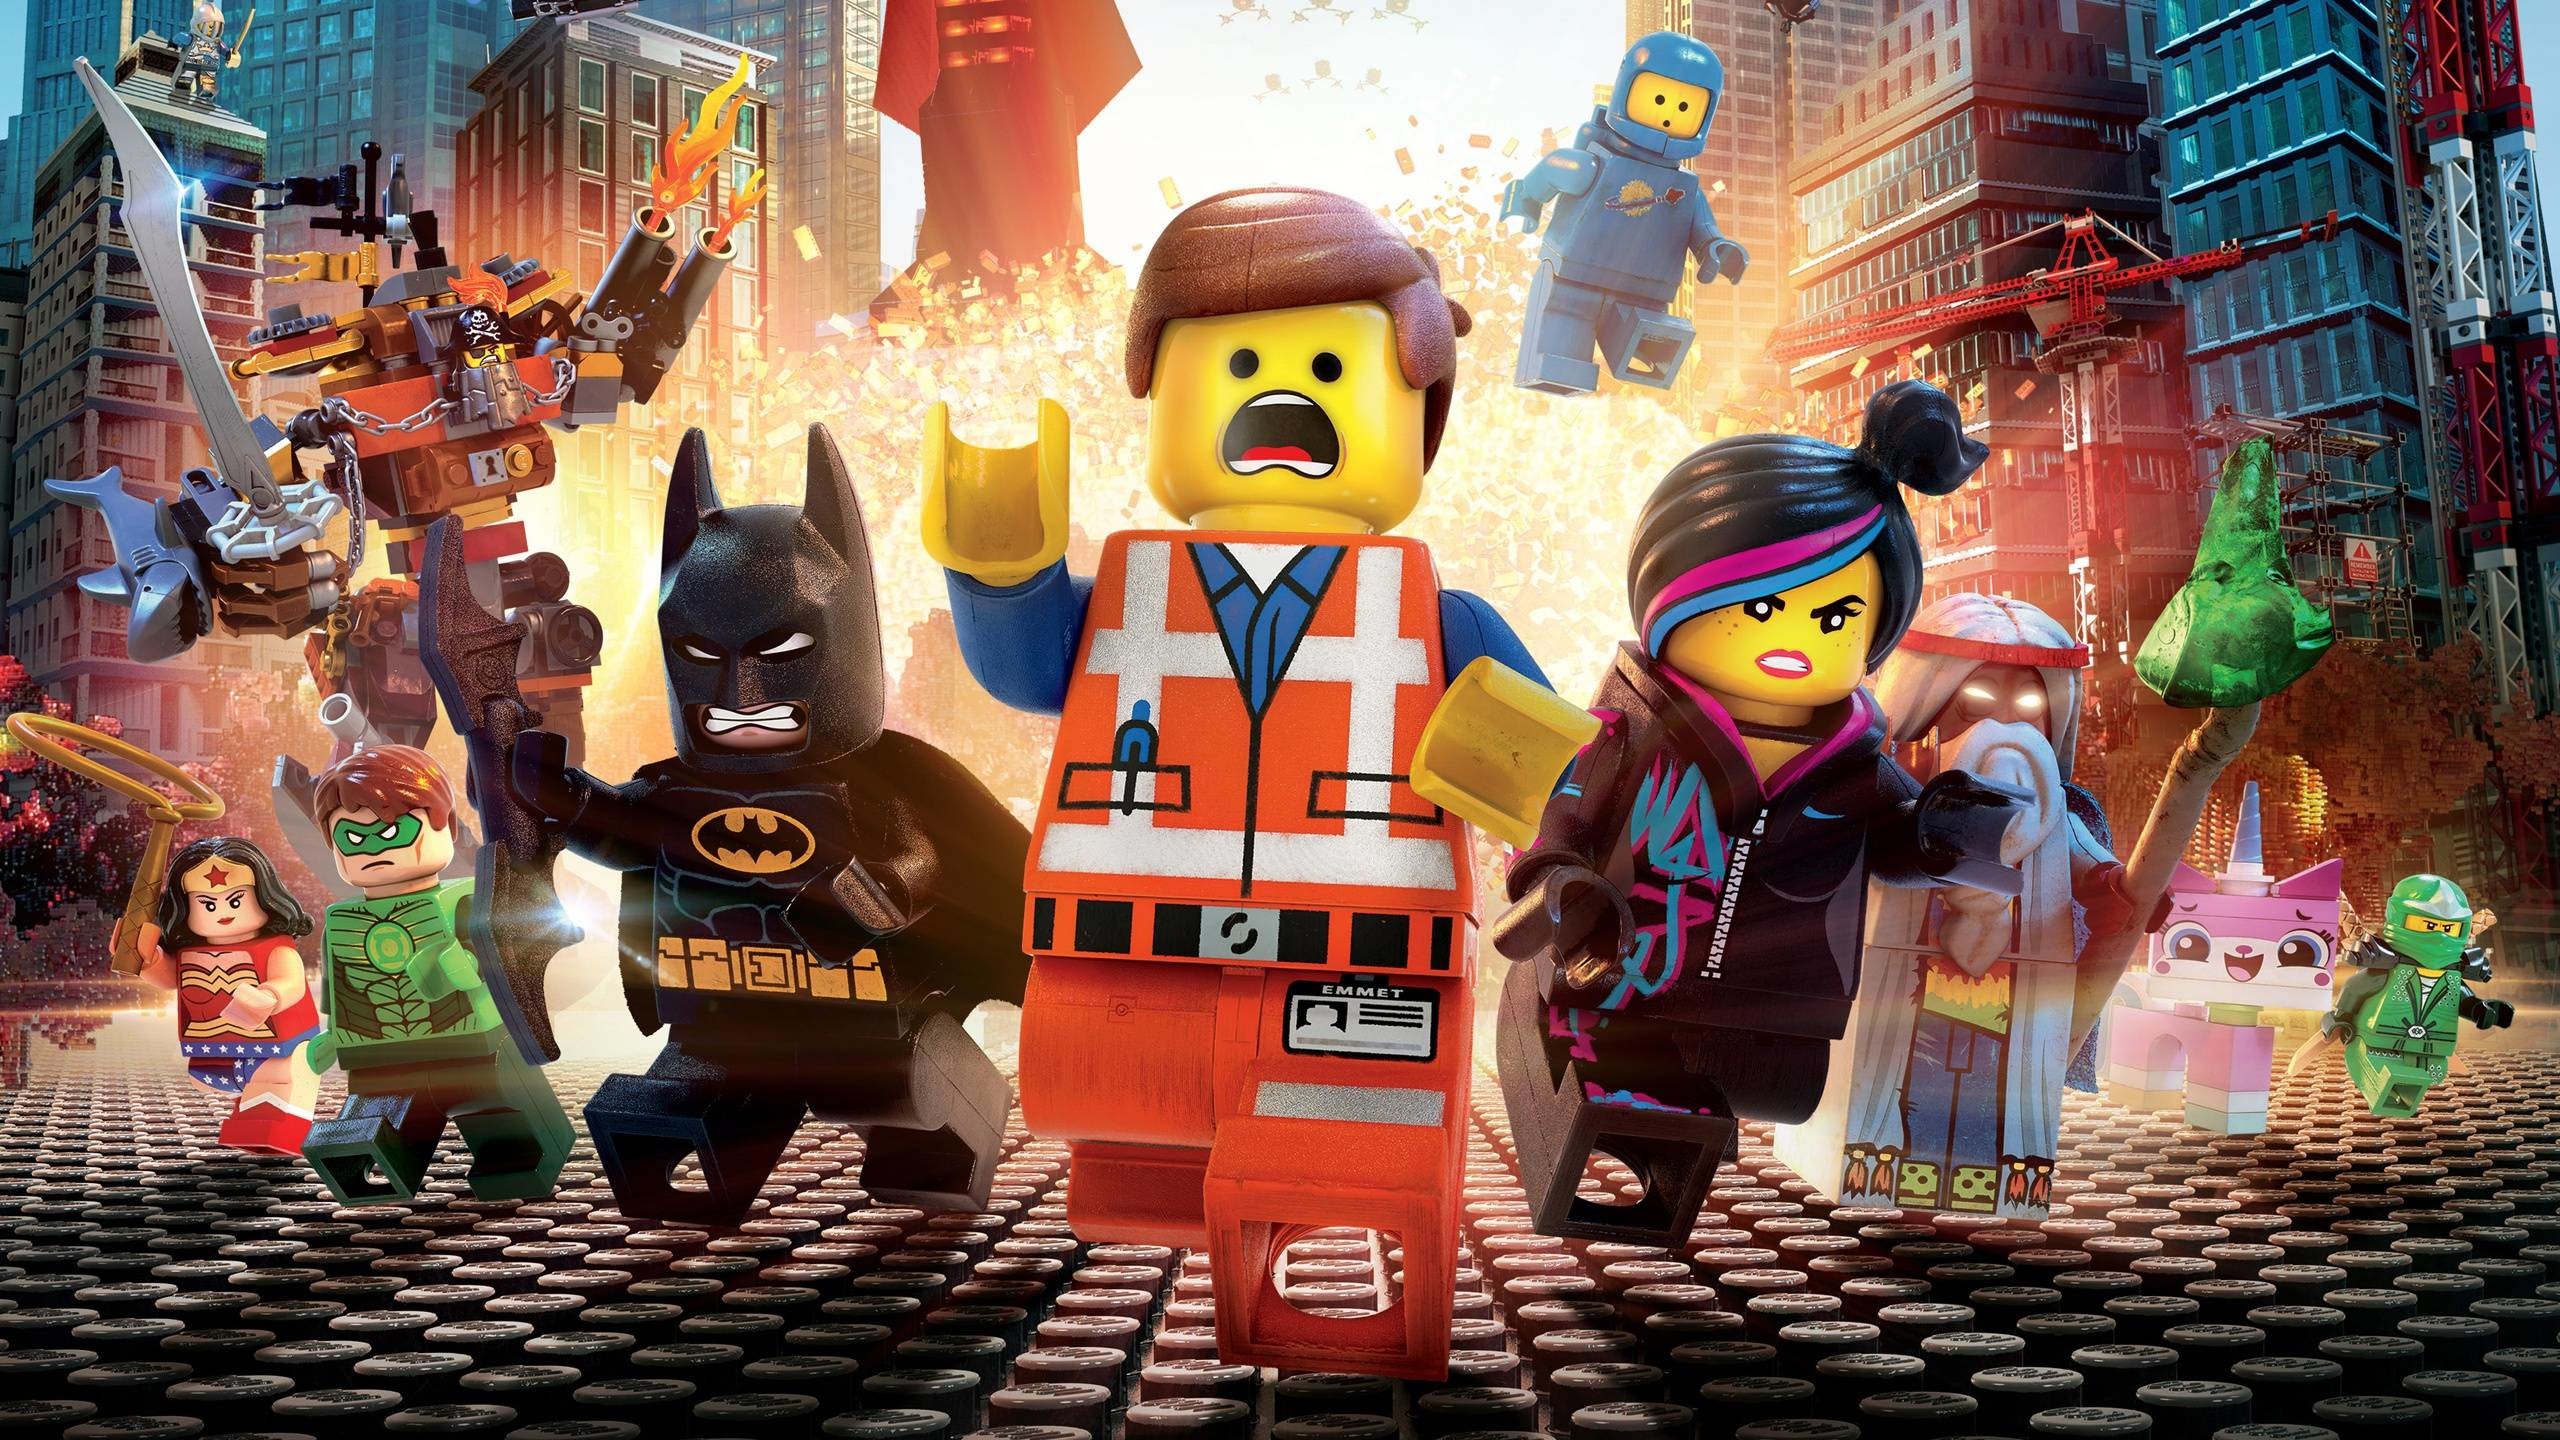 2560x1440 The Lego Movie 2014 Wallpapers | HD Wallpapers